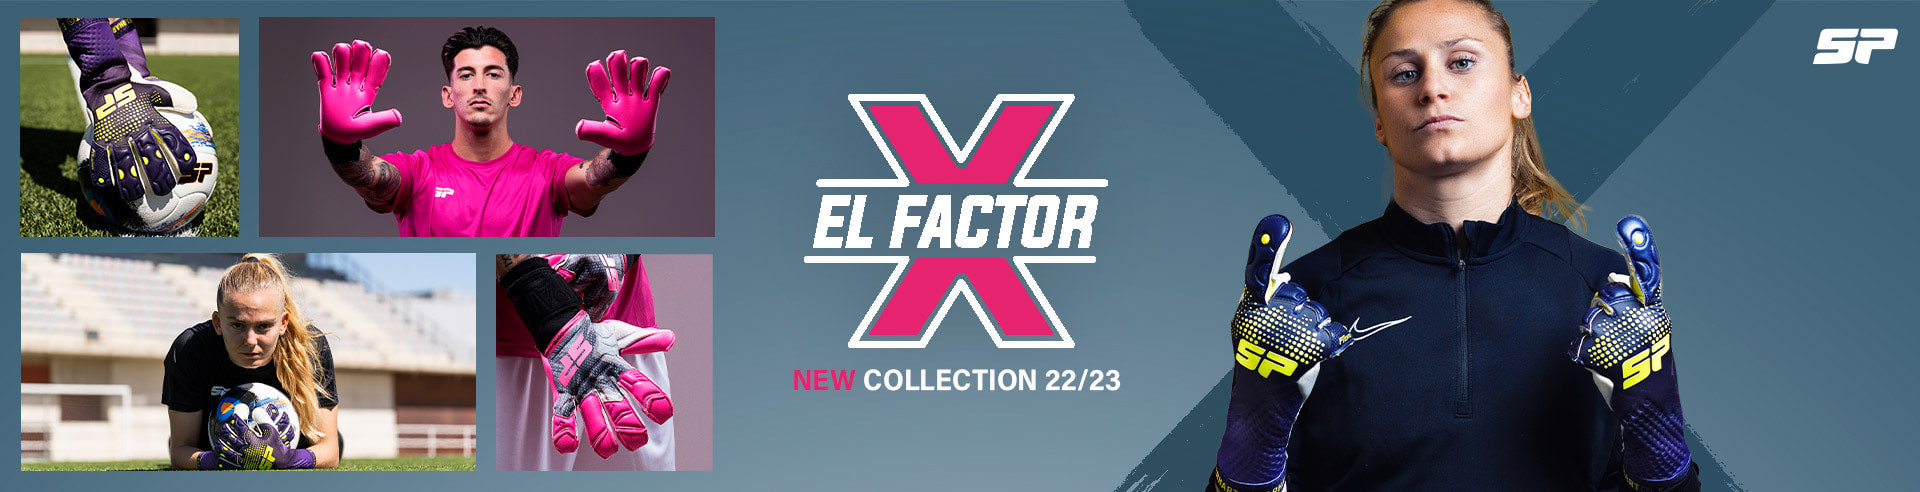 SP FACTOR X NEW COLLECTION